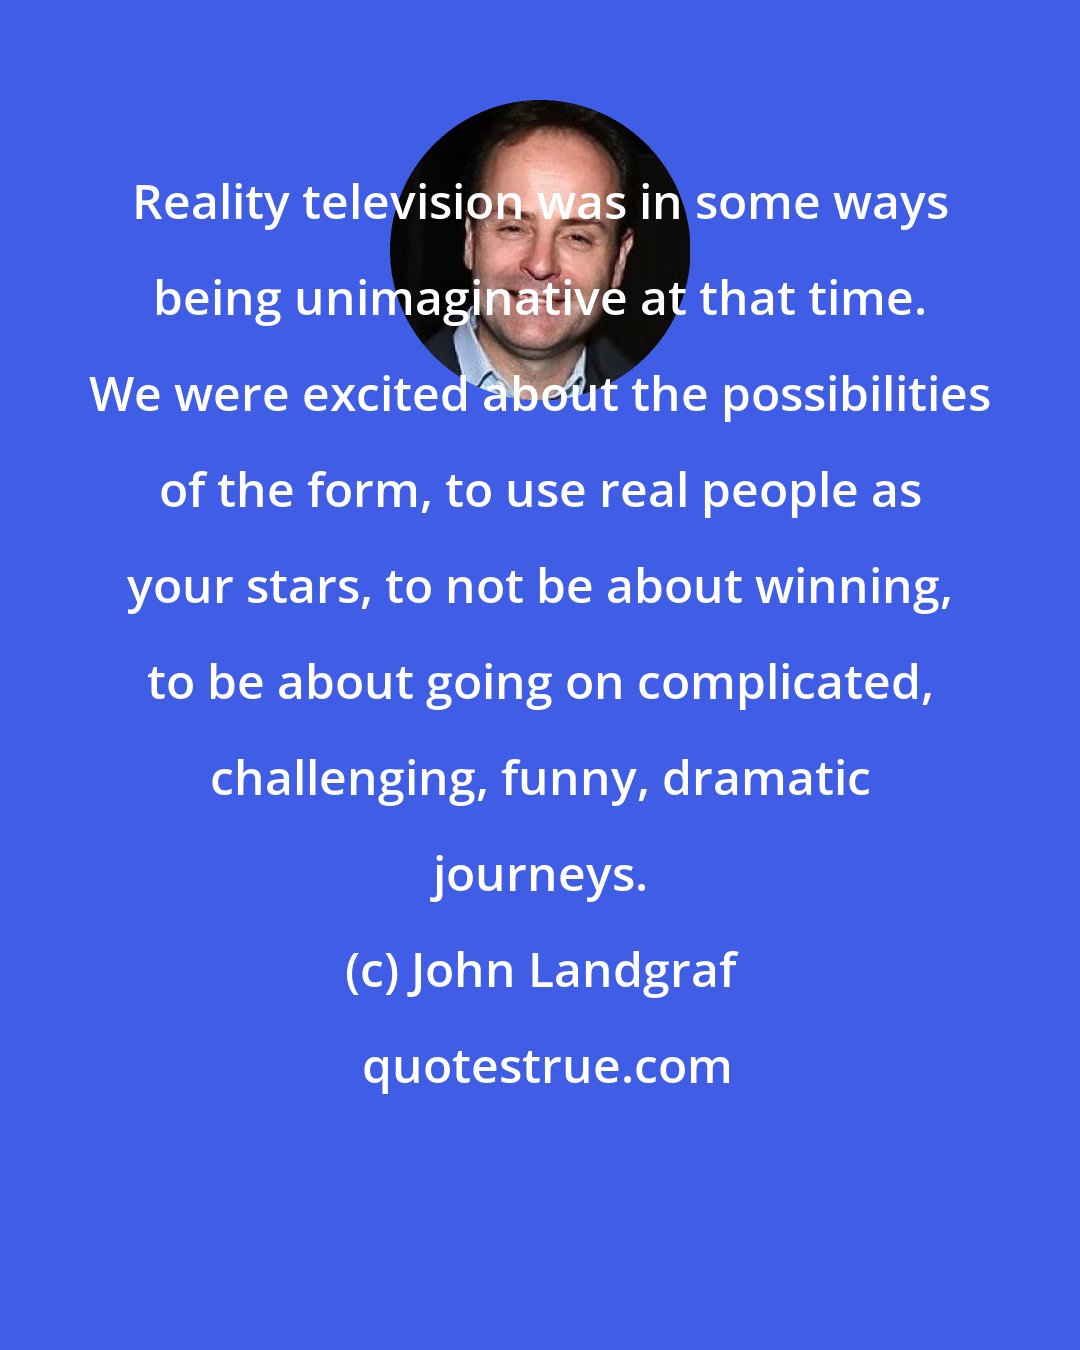 John Landgraf: Reality television was in some ways being unimaginative at that time. We were excited about the possibilities of the form, to use real people as your stars, to not be about winning, to be about going on complicated, challenging, funny, dramatic journeys.